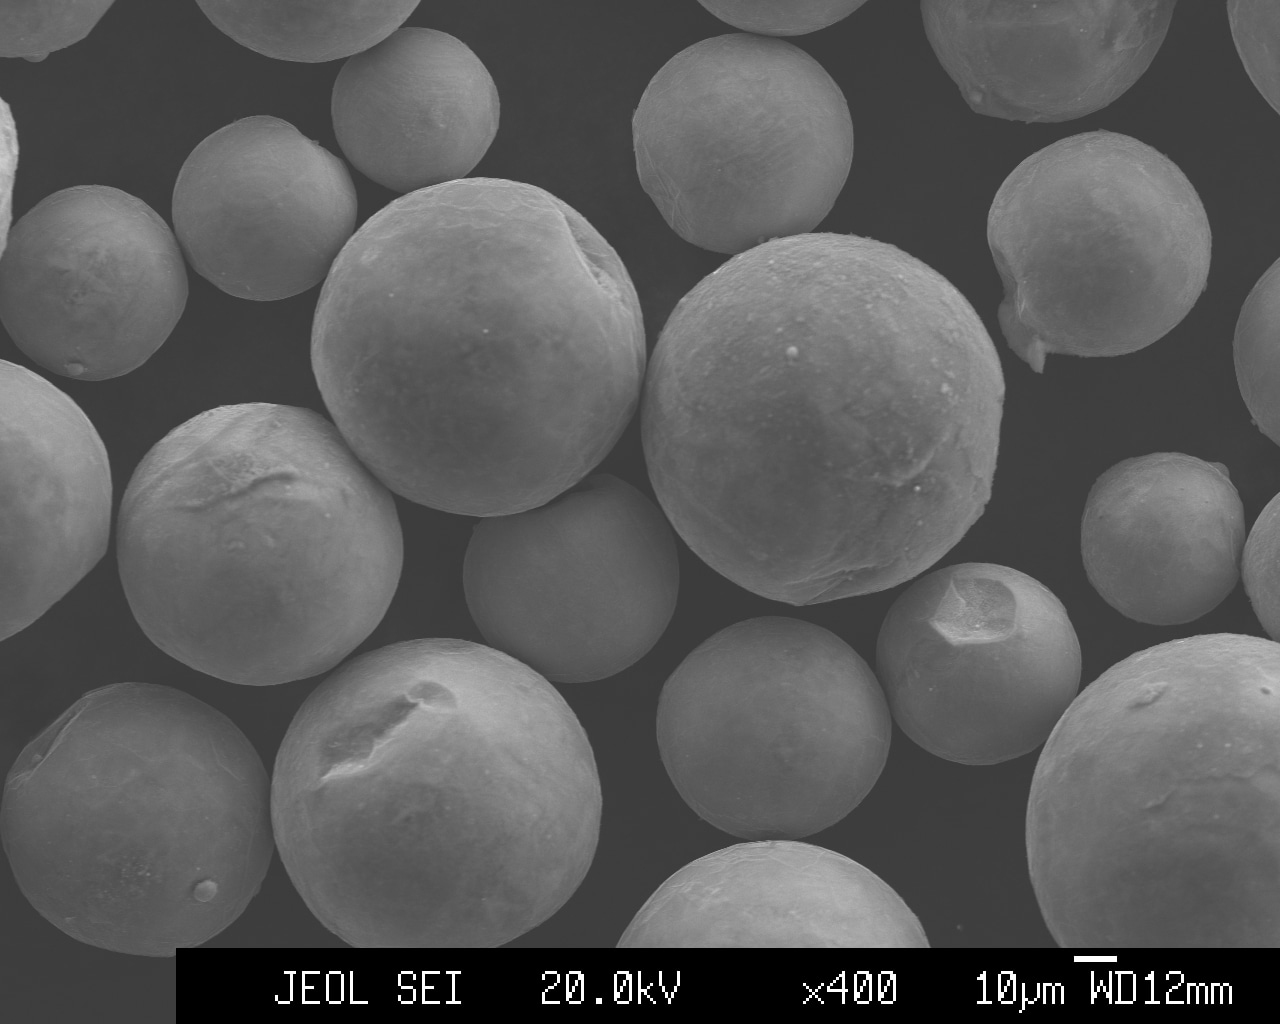 Study on the properties of spherical cast tungsten carbide powders prepared by different methods